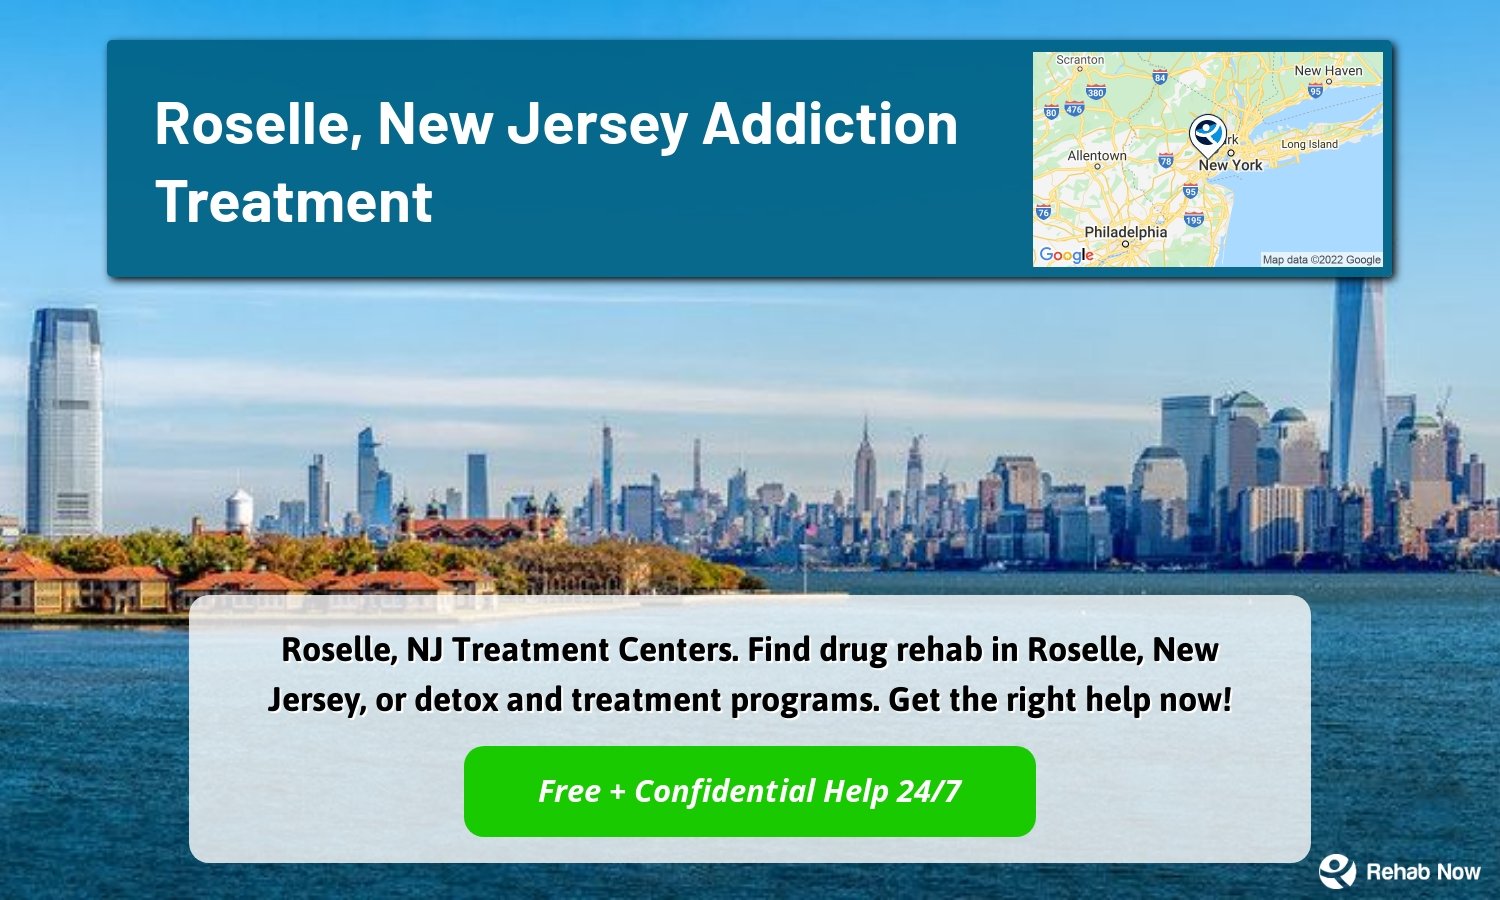 Roselle, NJ Treatment Centers. Find drug rehab in Roselle, New Jersey, or detox and treatment programs. Get the right help now!